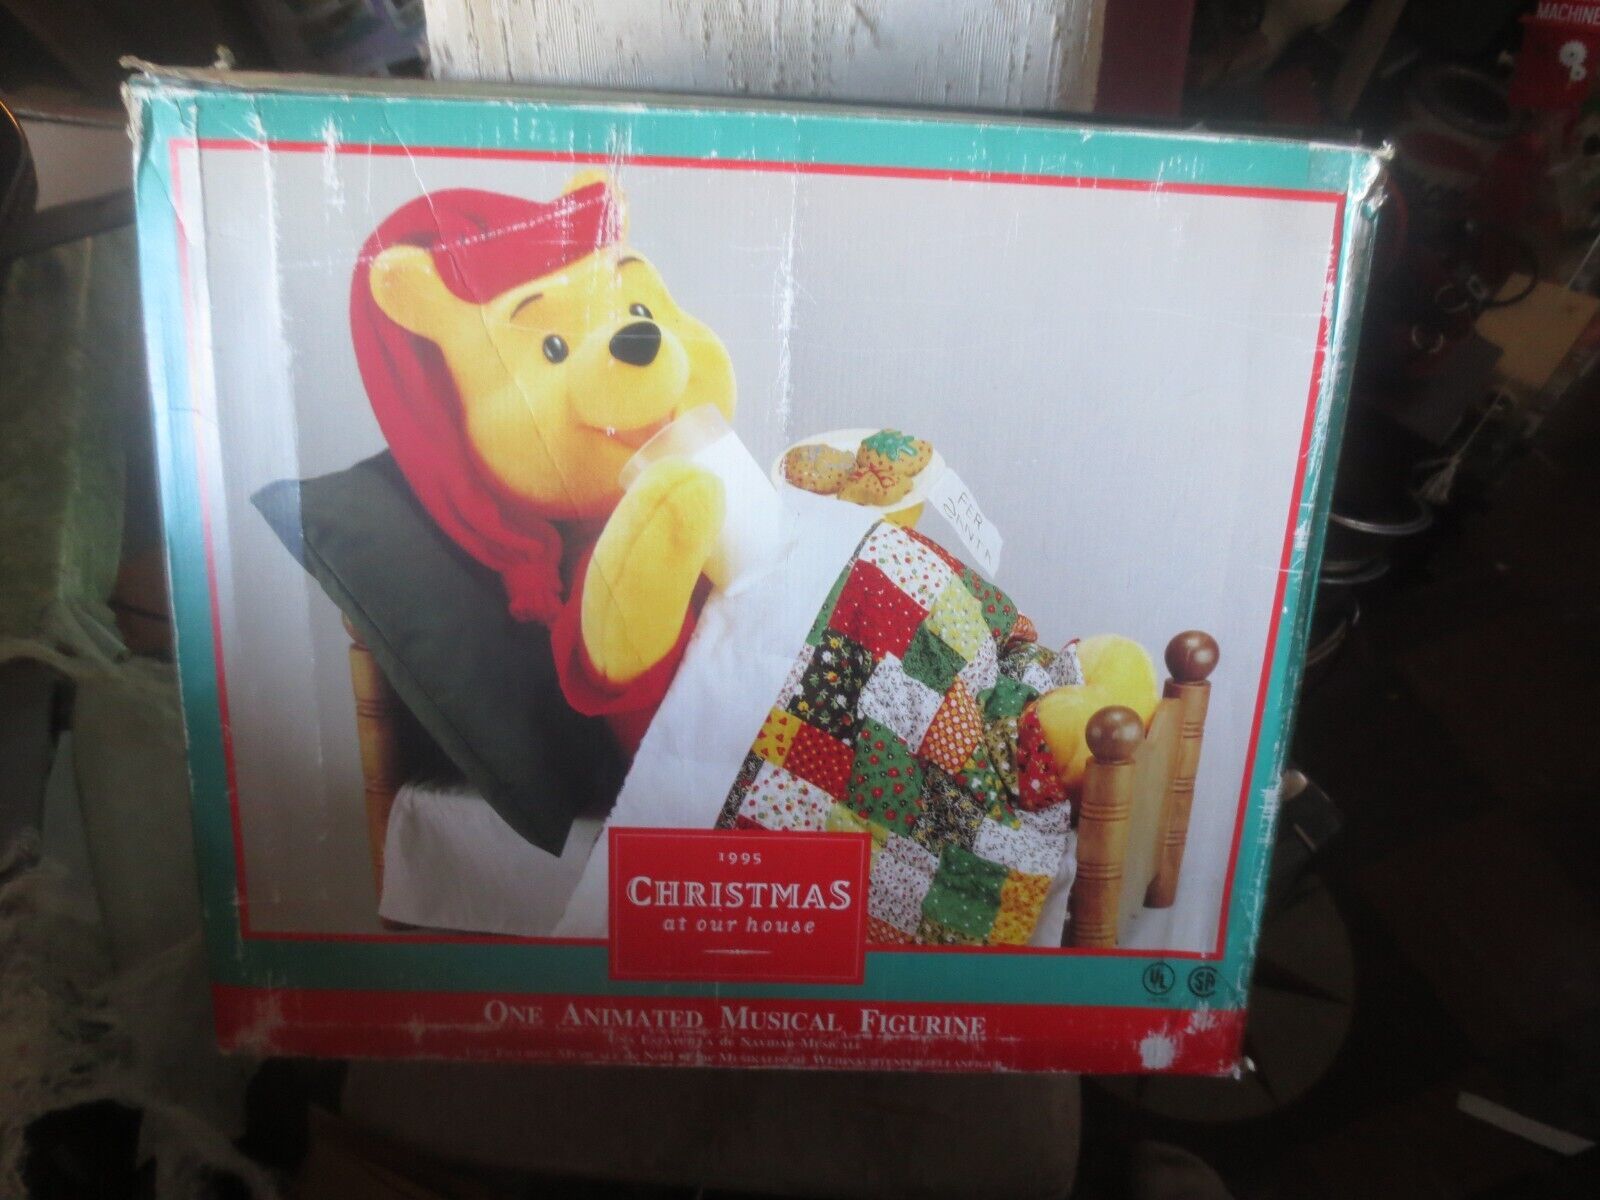 Primary image for 1995 Disney at Our House Winnie the Pooh Musical Motion Figure in box New